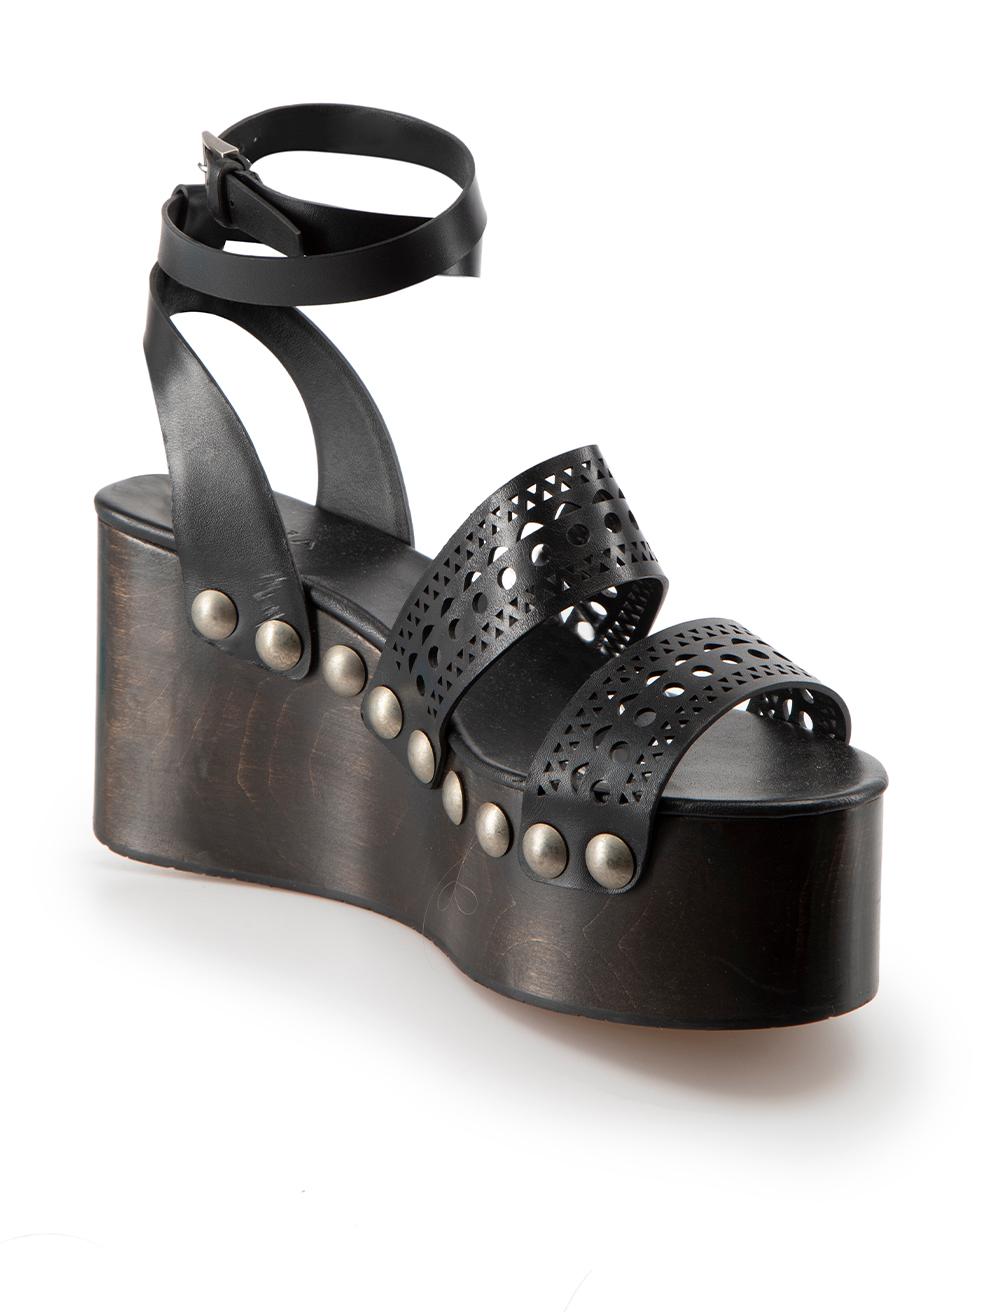 CONDITION is Very good. Minimal wear to sandals is evident. Minimal wear to wooden wedge with a number of negligible scuffs seen on this used Alaïa designer resale item.

Details
Black
Leather
Platform sandals
Studded
Cut-out straps
Adjustable ankle